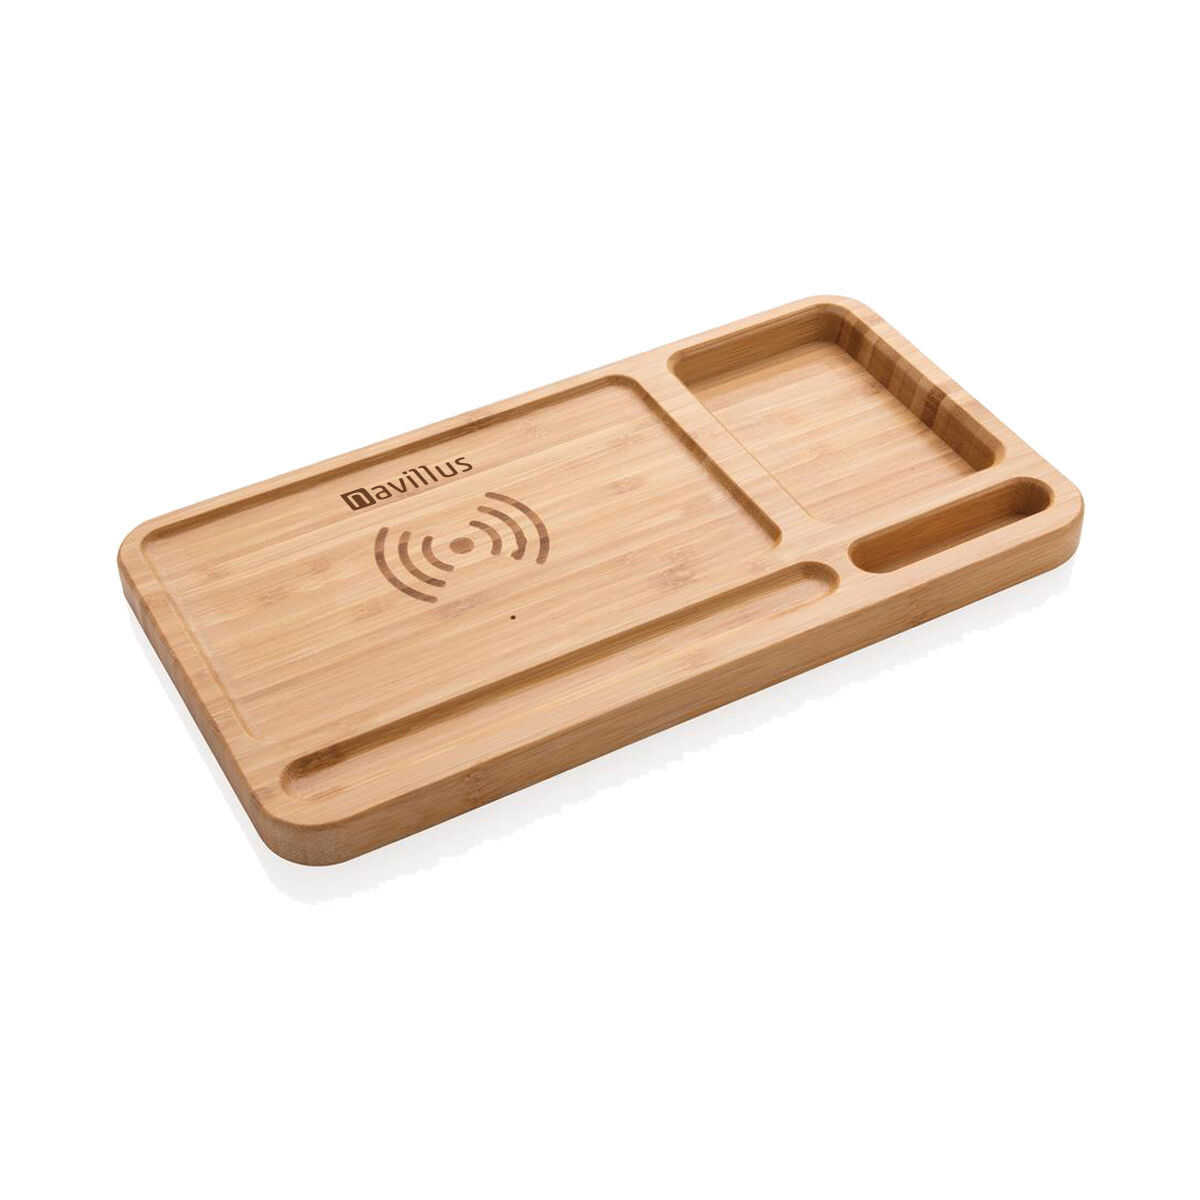 Bamboo Desk Organiser with Wireless Charger